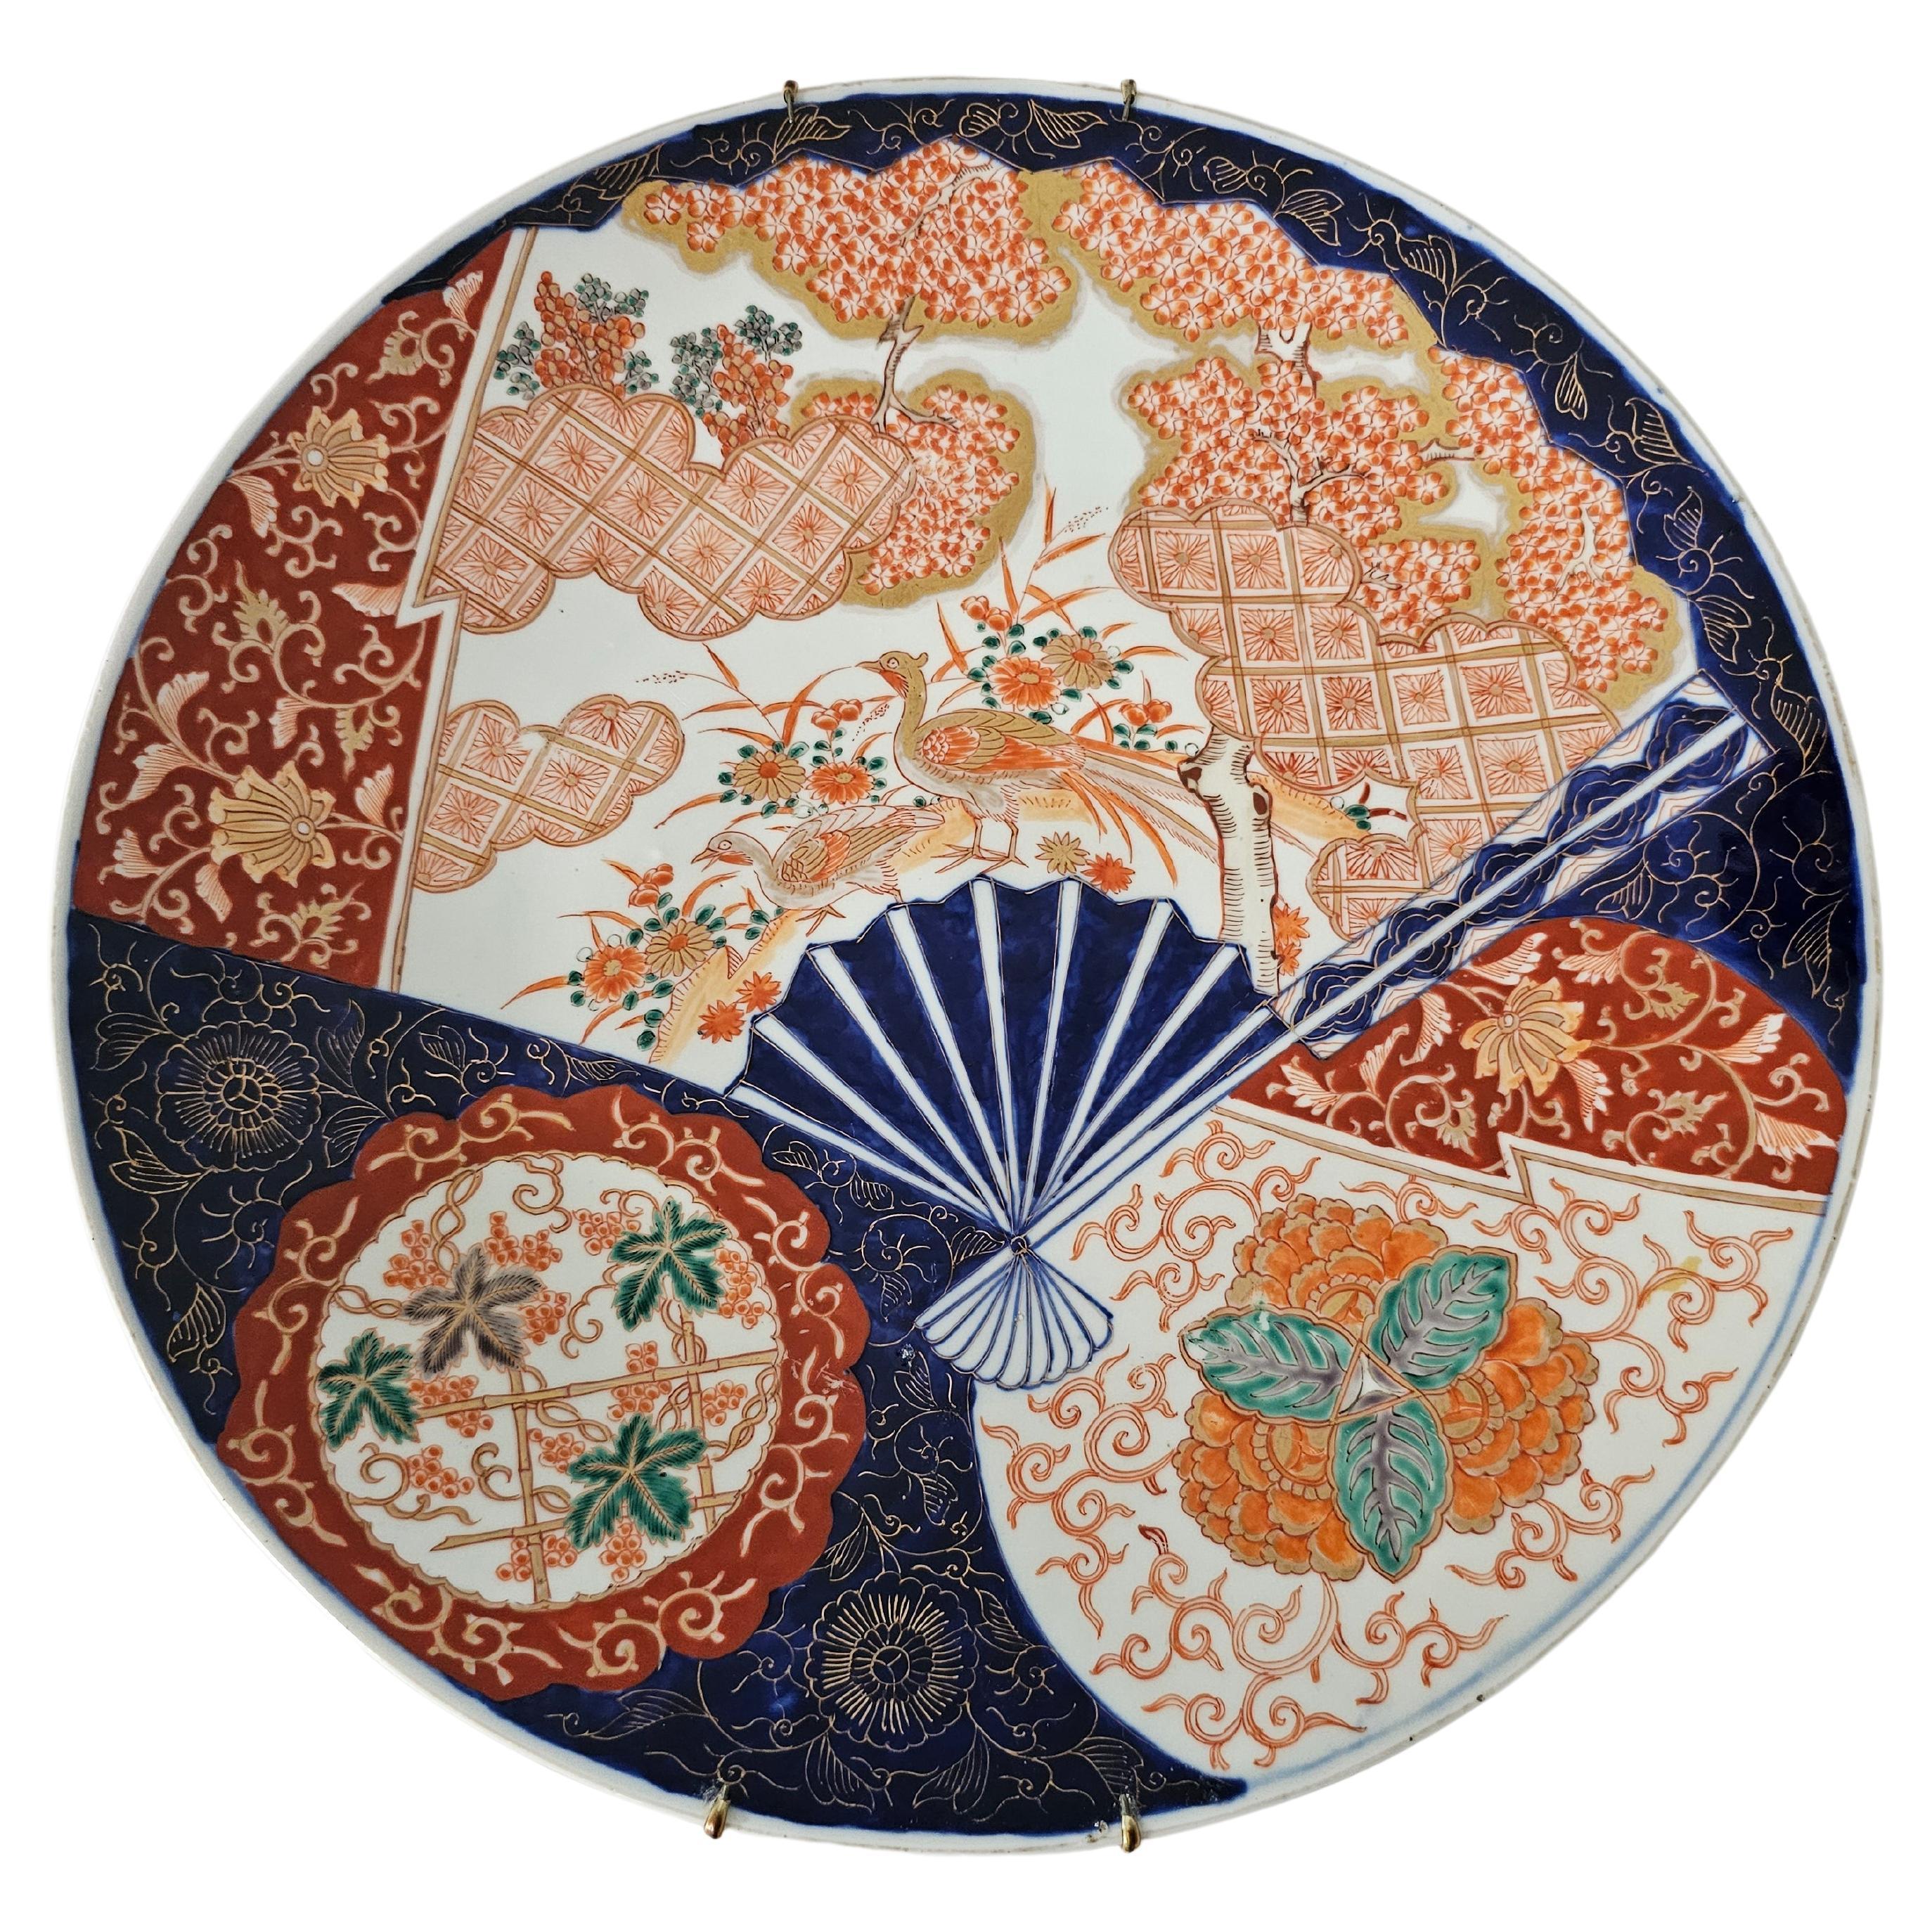 What does Imari style mean?